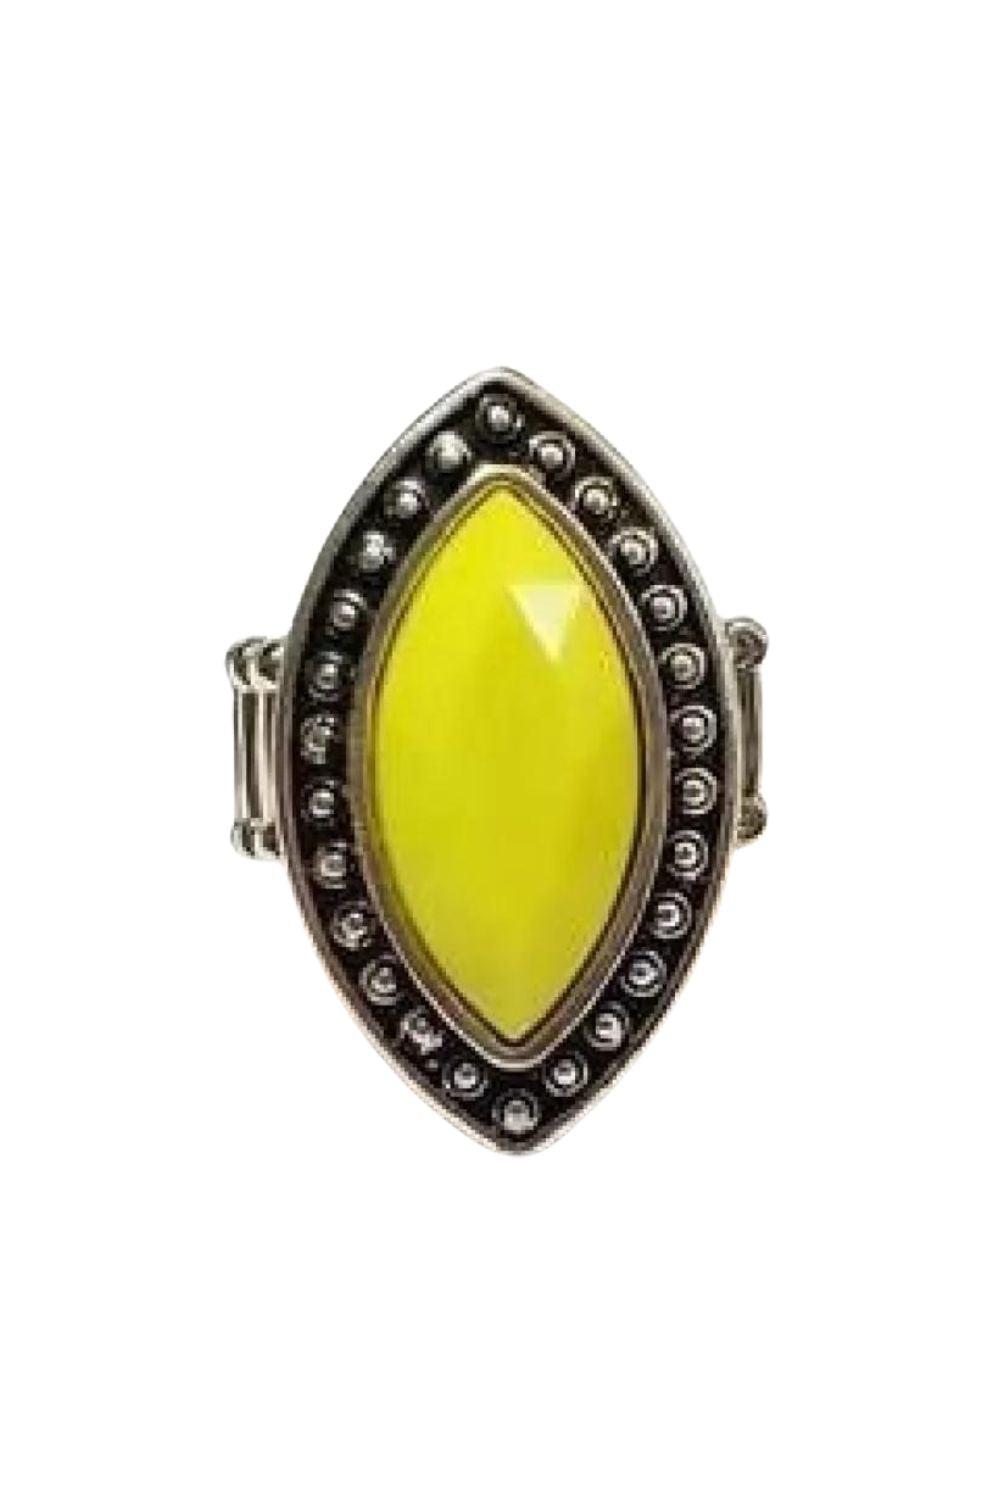 Serenely Sahara Yellow Ring - Paparazzi Accessories- lightbox - CarasShop.com - $5 Jewelry by Cara Jewels